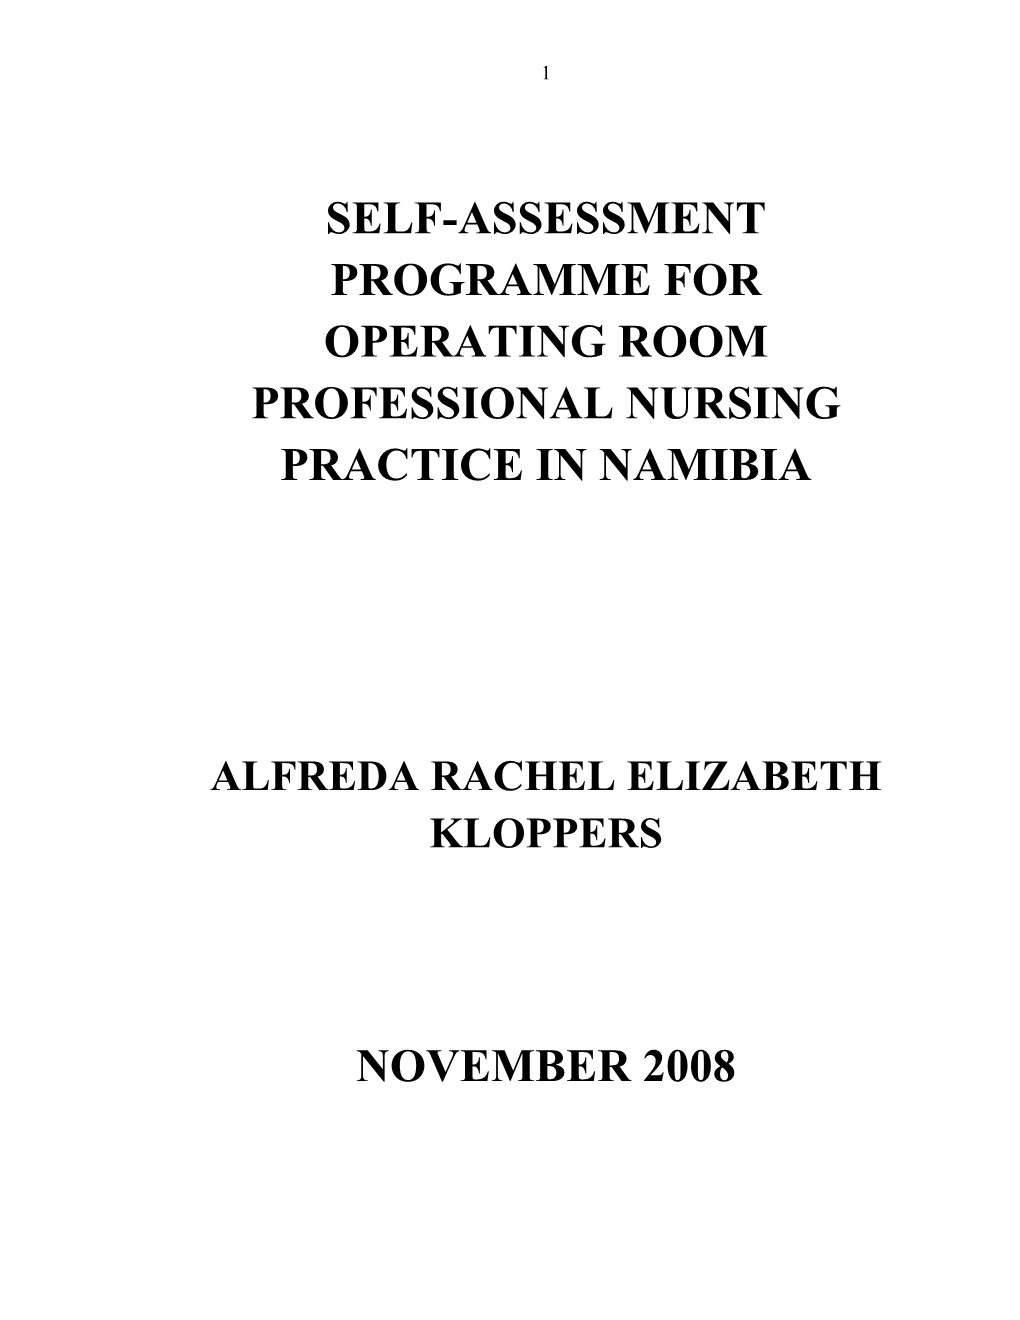 Self-Assessment Programme for Operating Room Professional Nursing Practice in Namibia